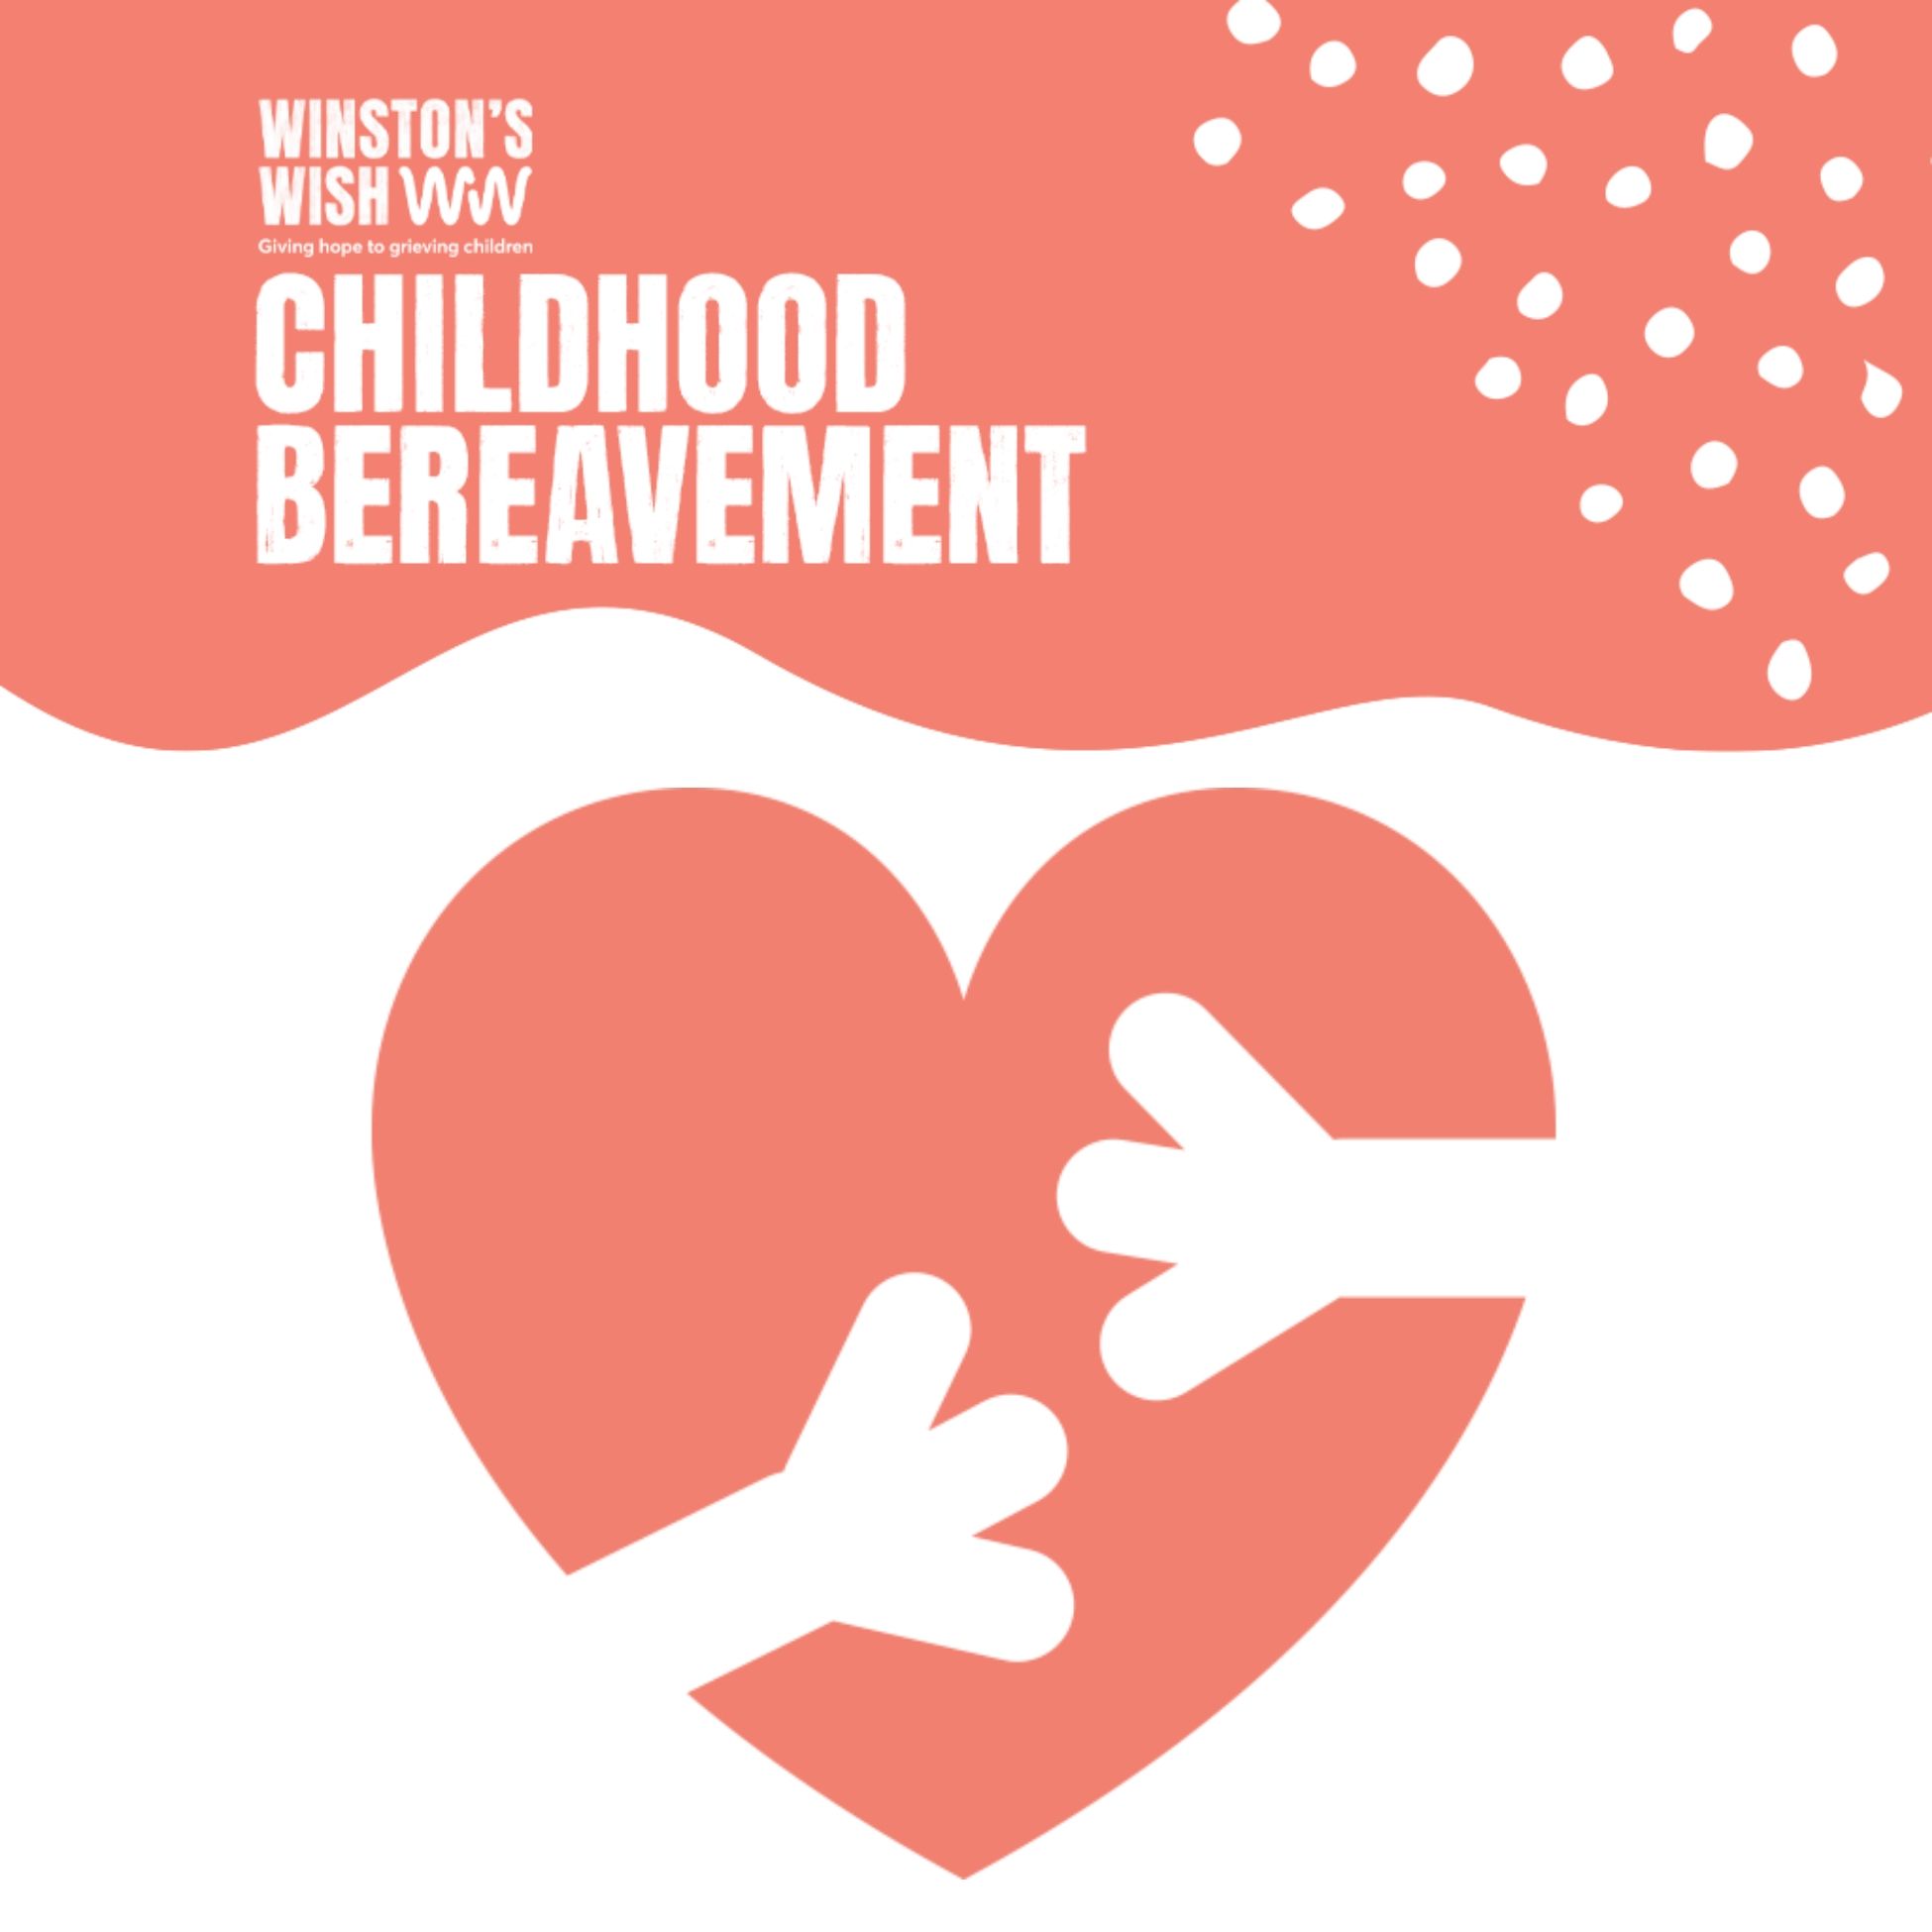 Childhood bereavement secondary course